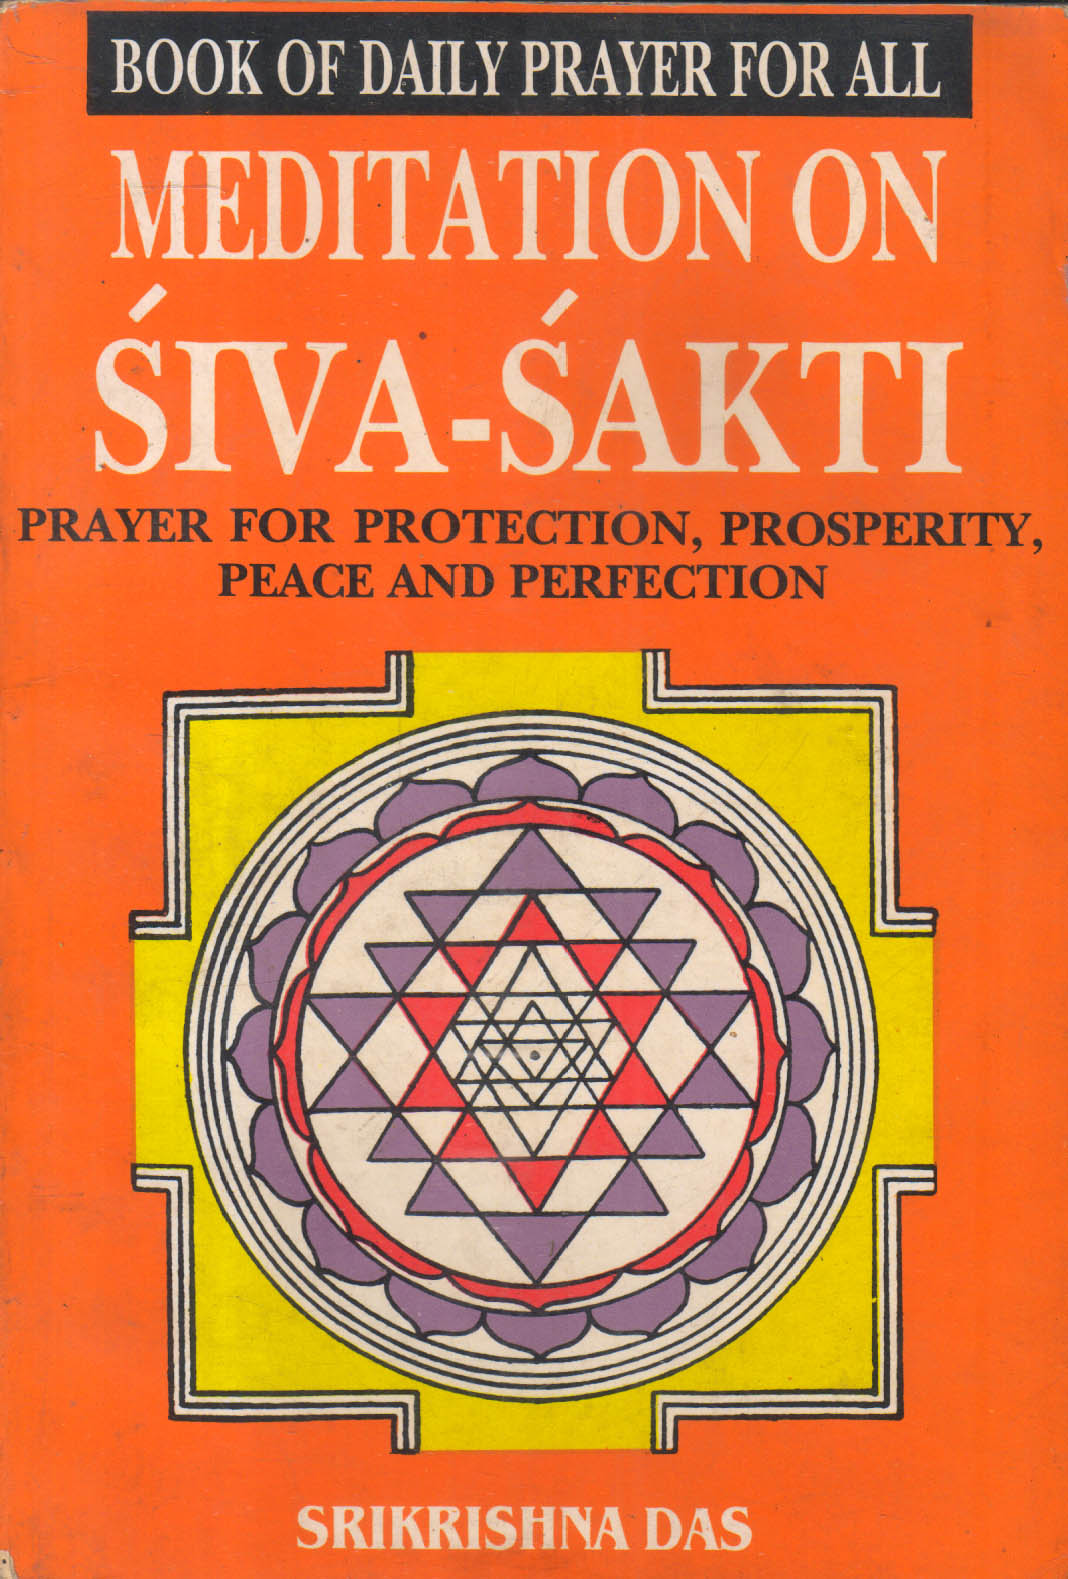 Book of Daily Prayer for All Meditation on Siva-Sakti: Prayer for Protection, Prosperity, Peace and Perfection